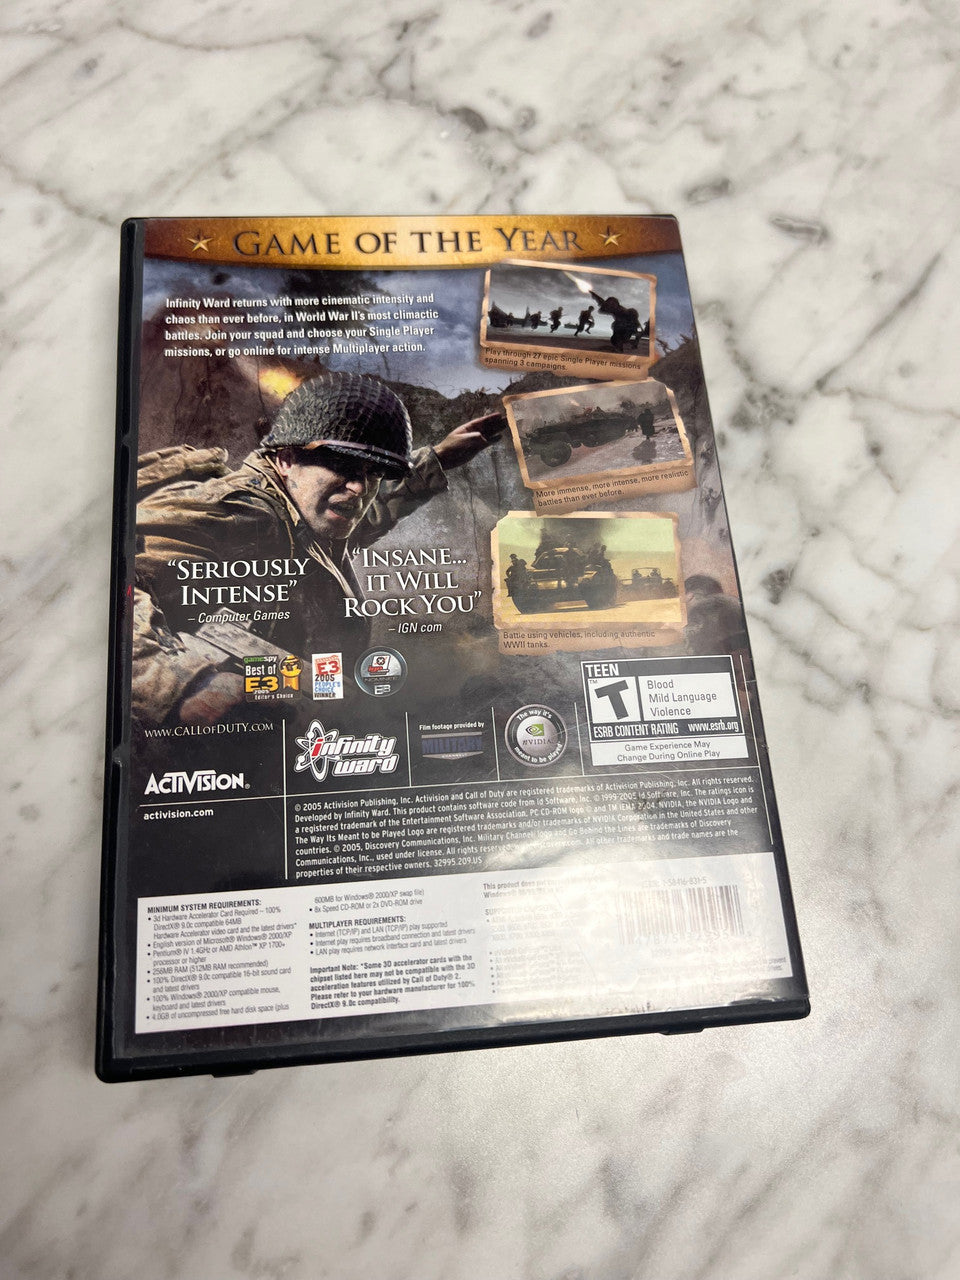 CALL OF DUTY 2 Game of the Year PC CD-ROM W/ Discs 1-6 Manual